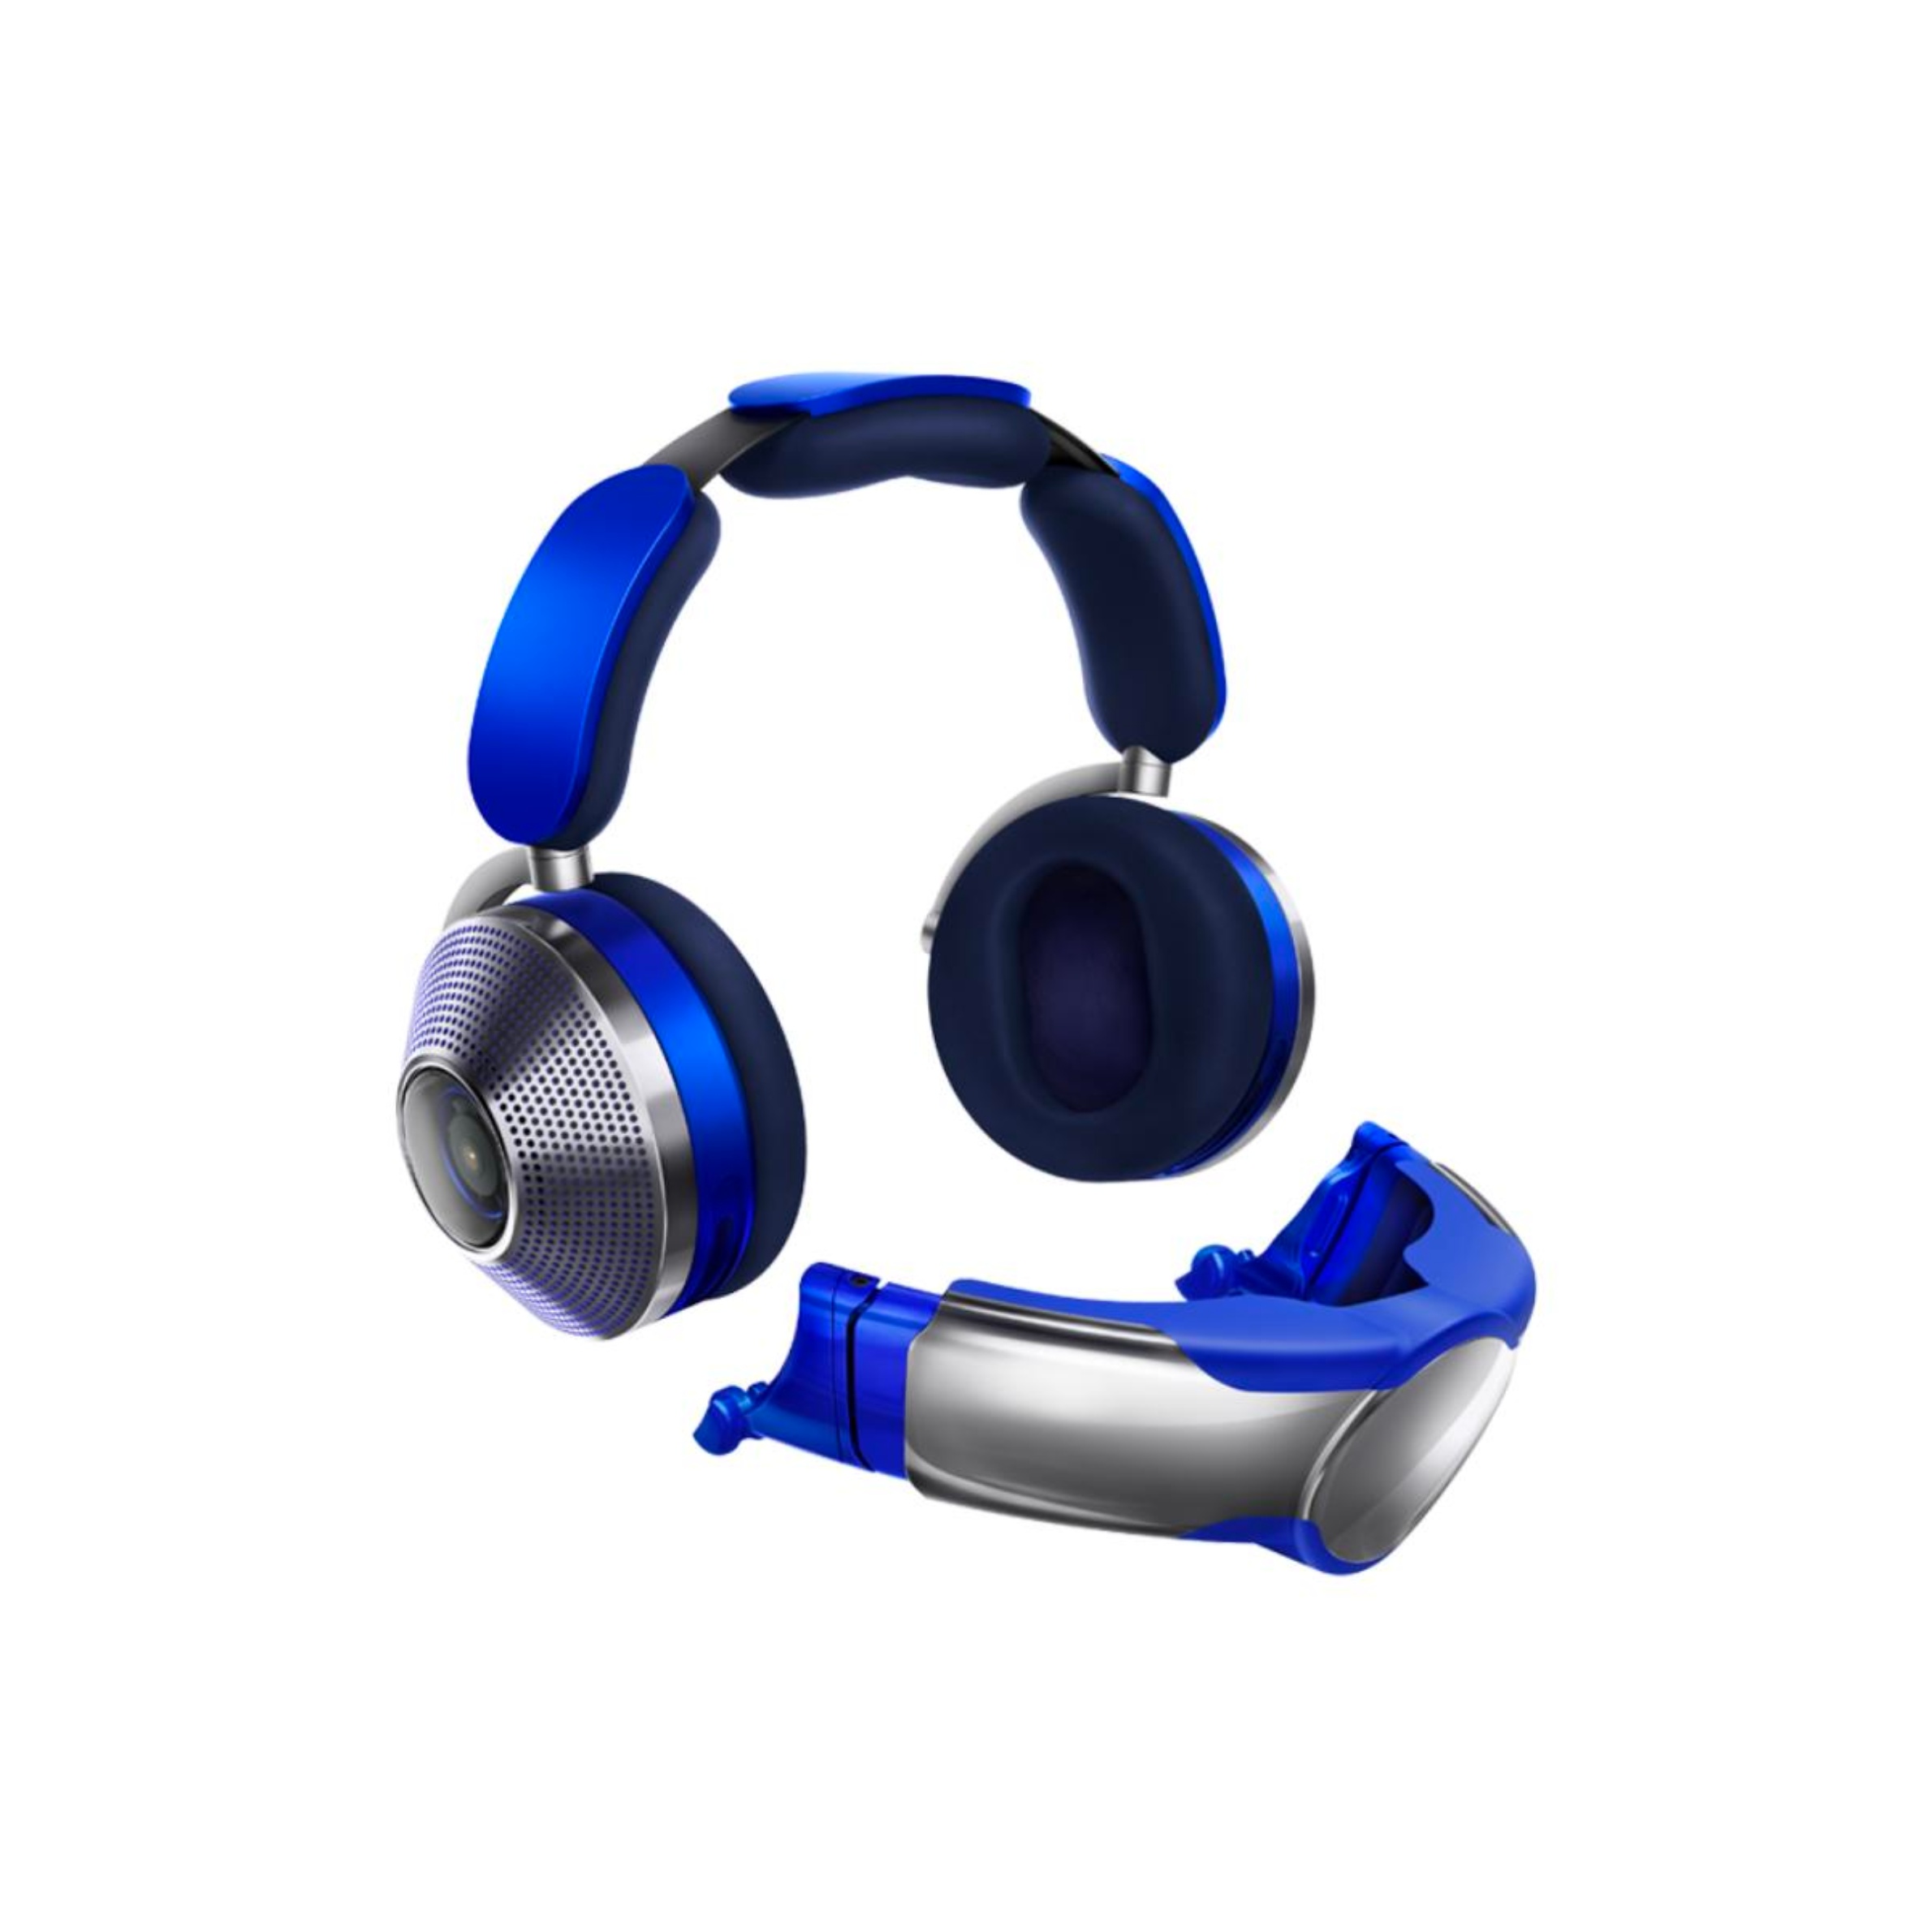 Dyson Zone™ Absolute+  Headphones (Prussian Blue/Bright Copper)